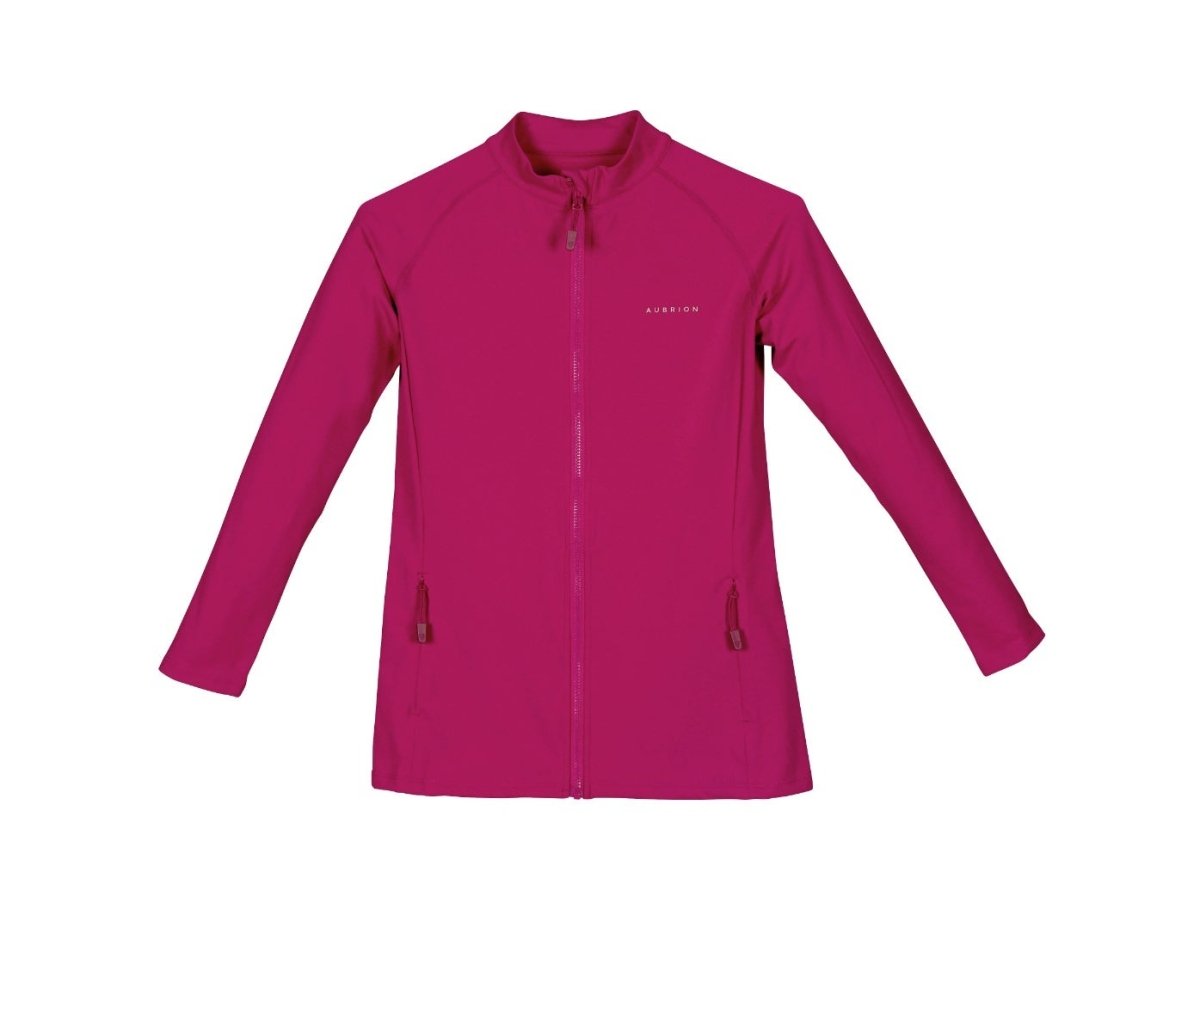 Aubrion AW23 Young Rider Non Stop Jacket - Cerise - 7/8